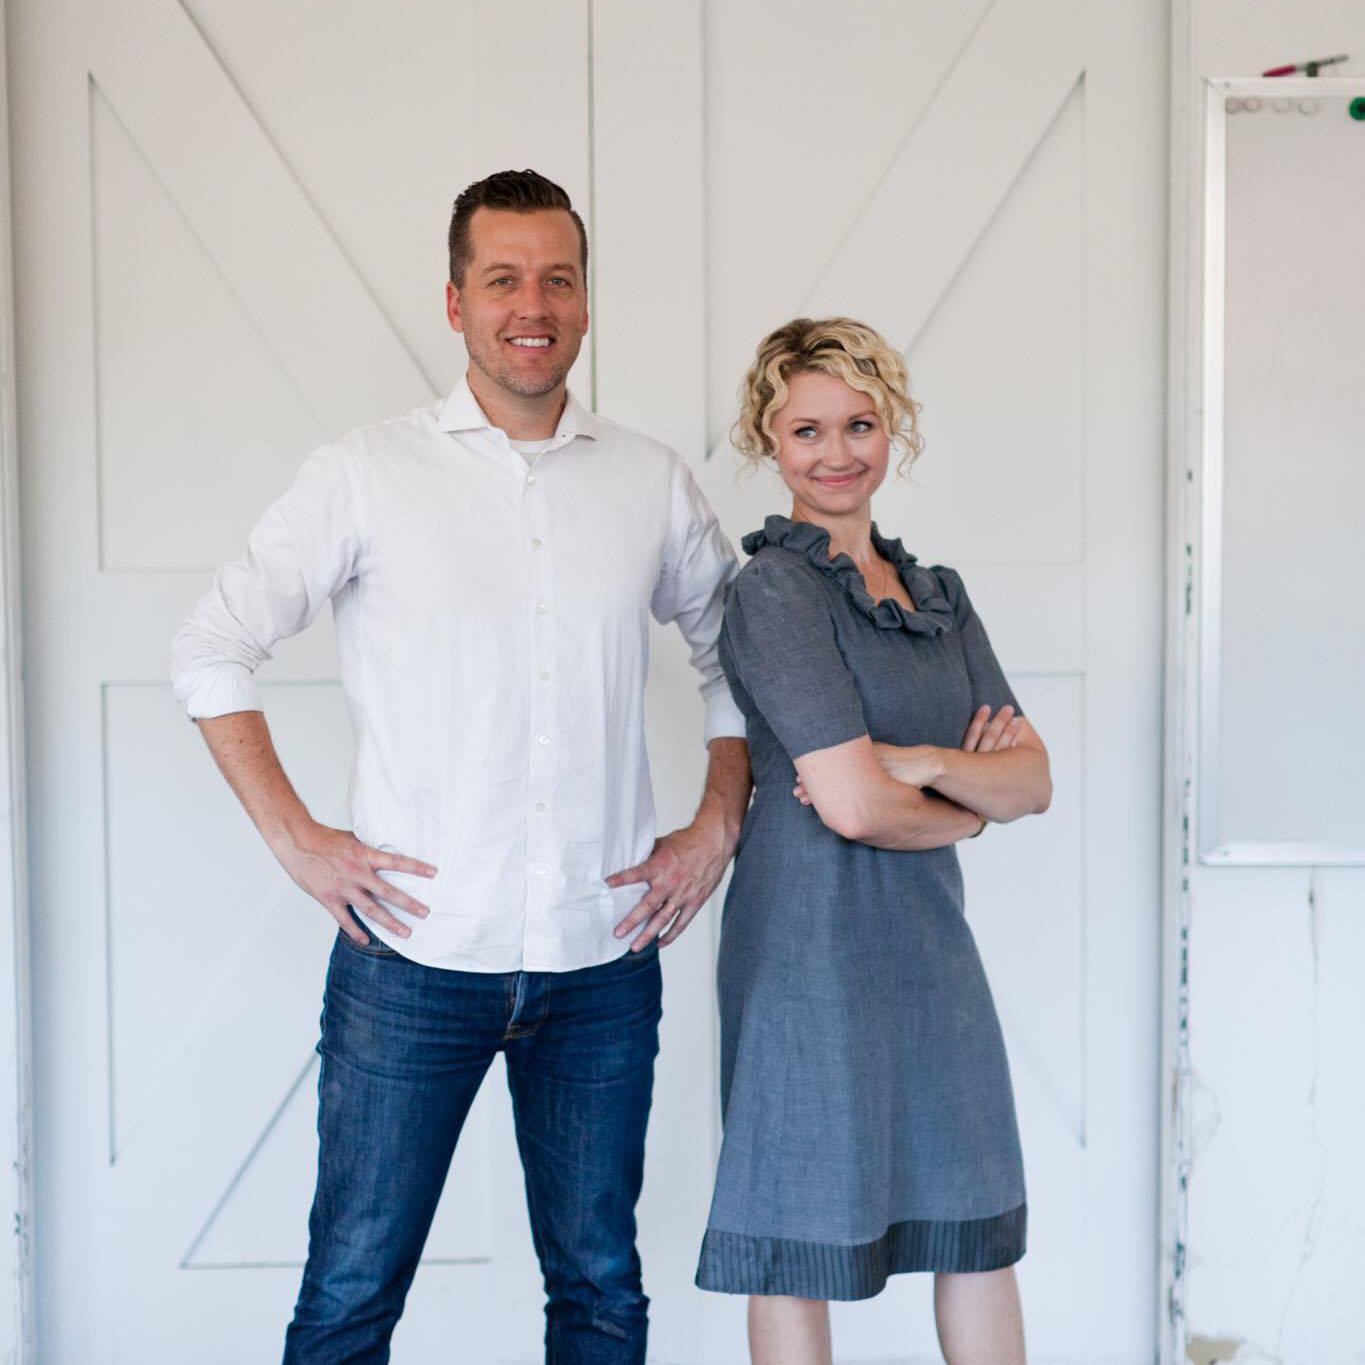 Ben and Katie created Puj.com from their garage and built it into a globally recognized 8 figure brand.